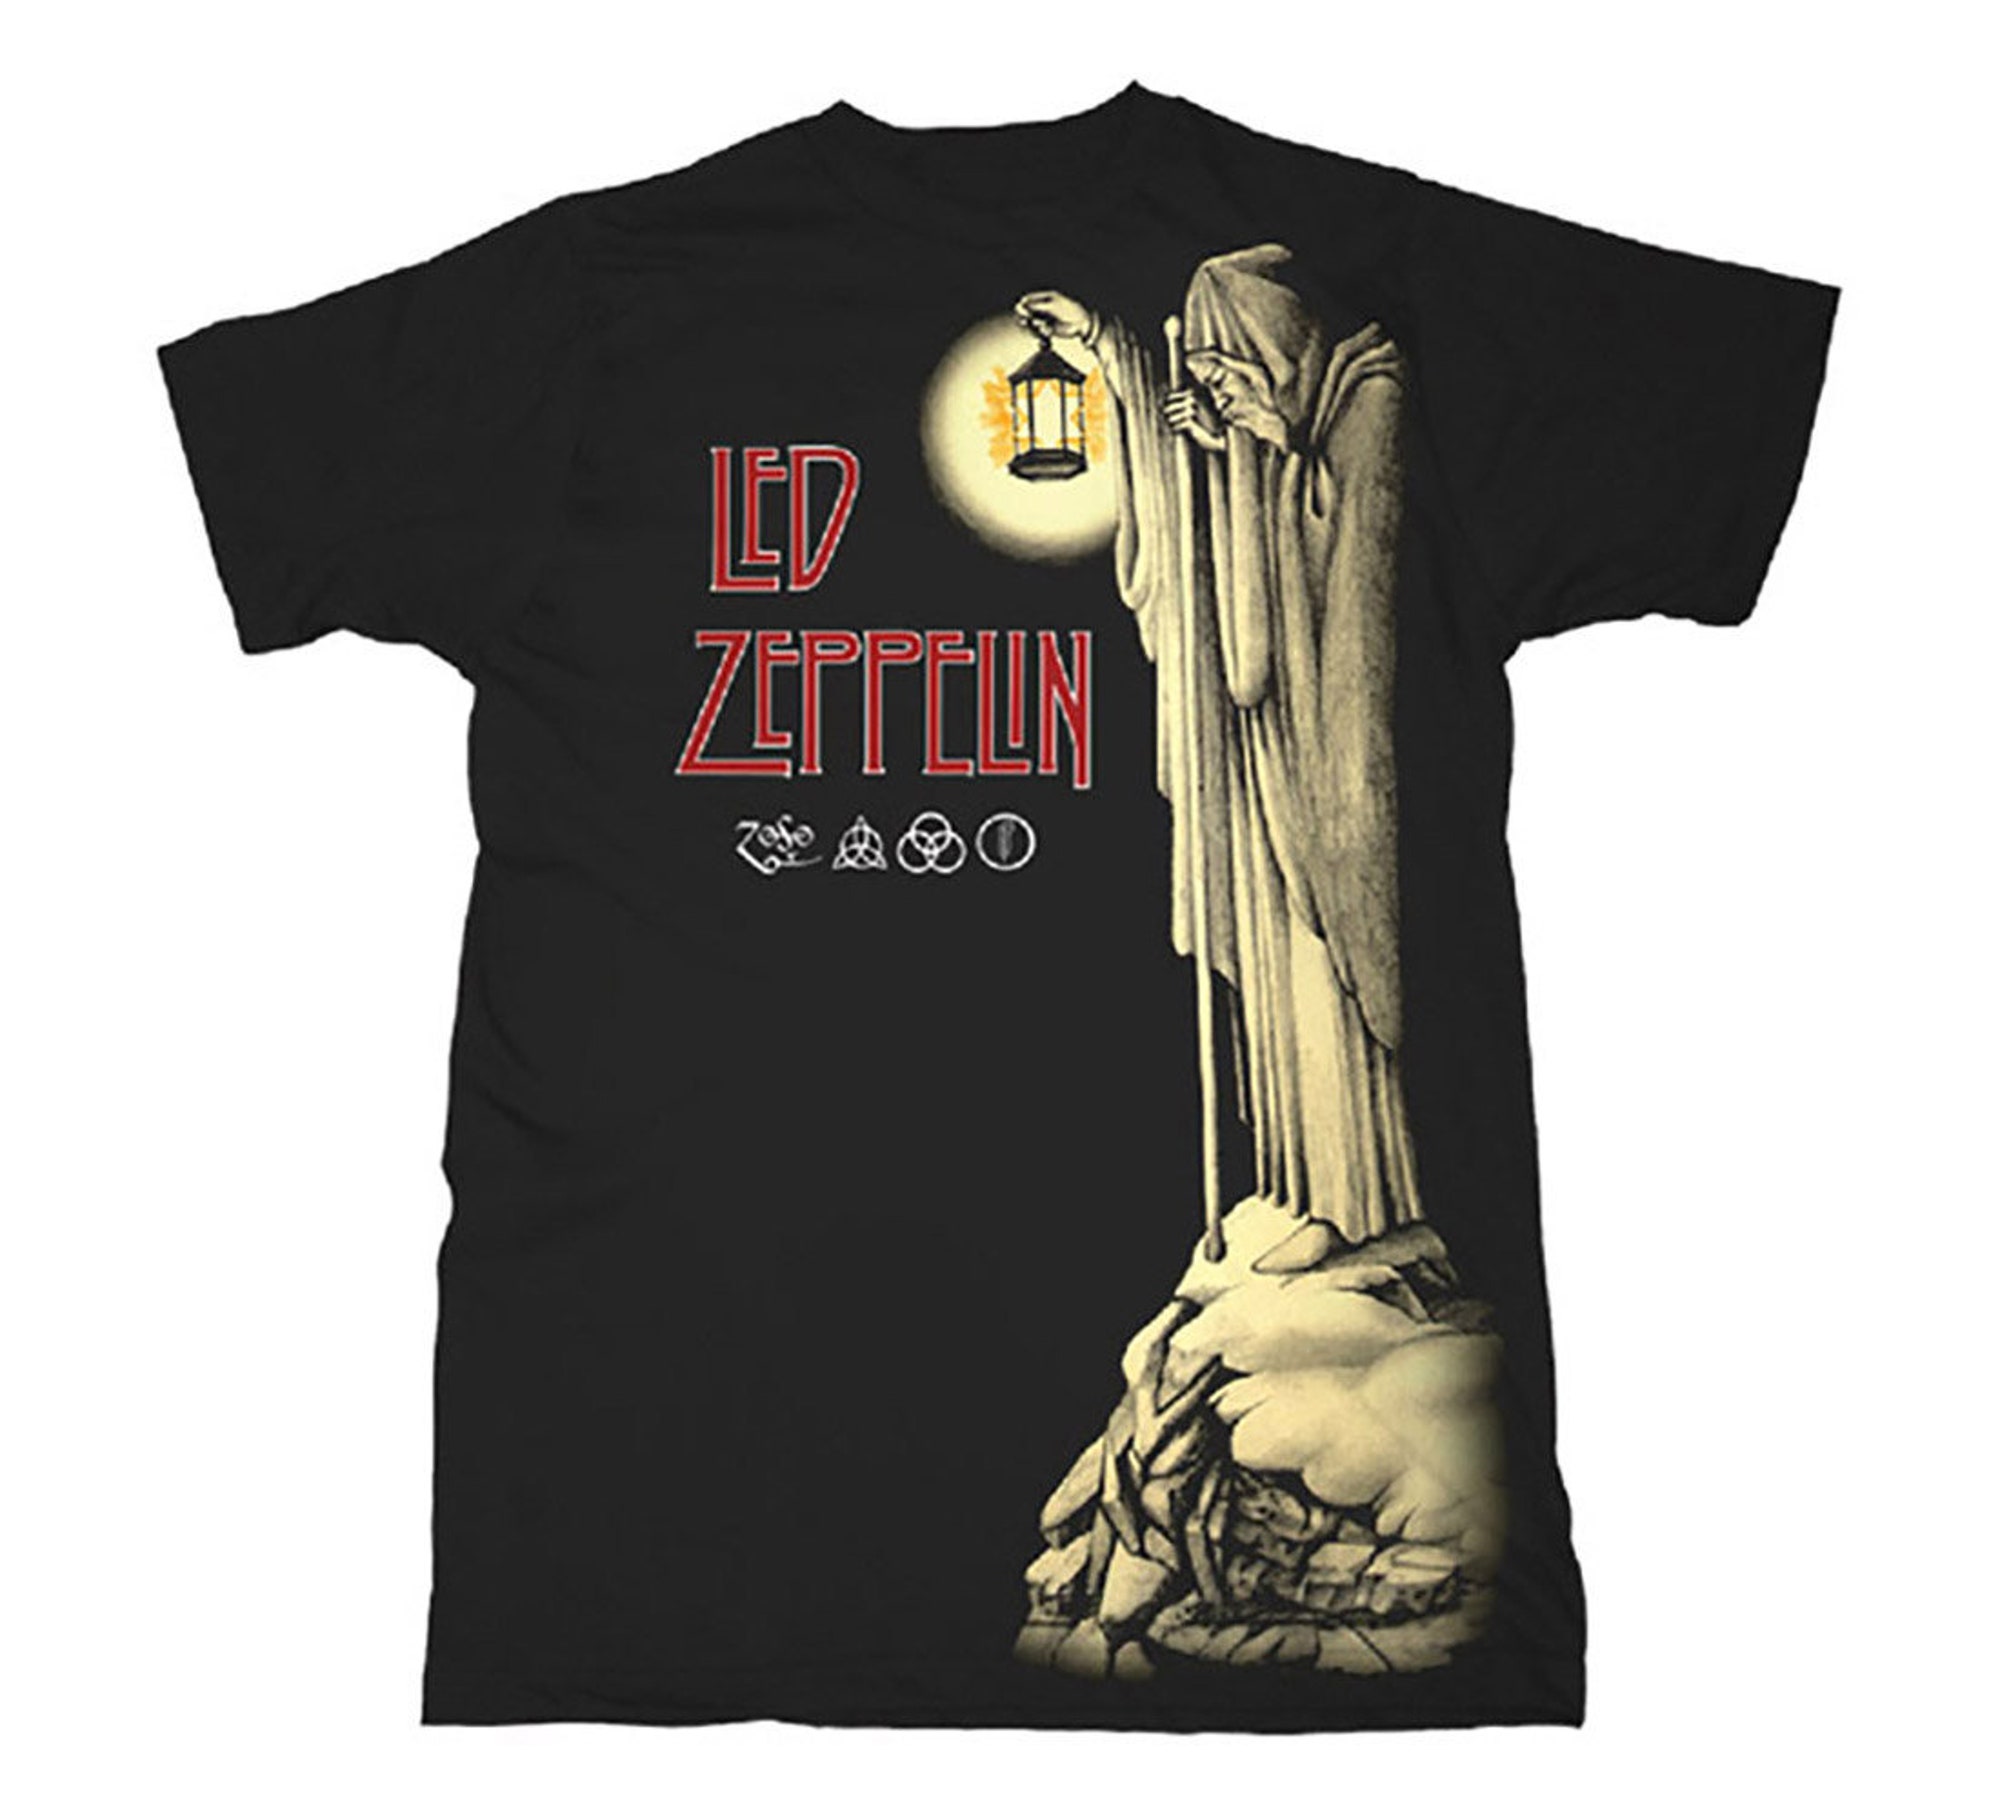 Discover Led Zeppelin Hermit Stairway To Heaven T-Shirt